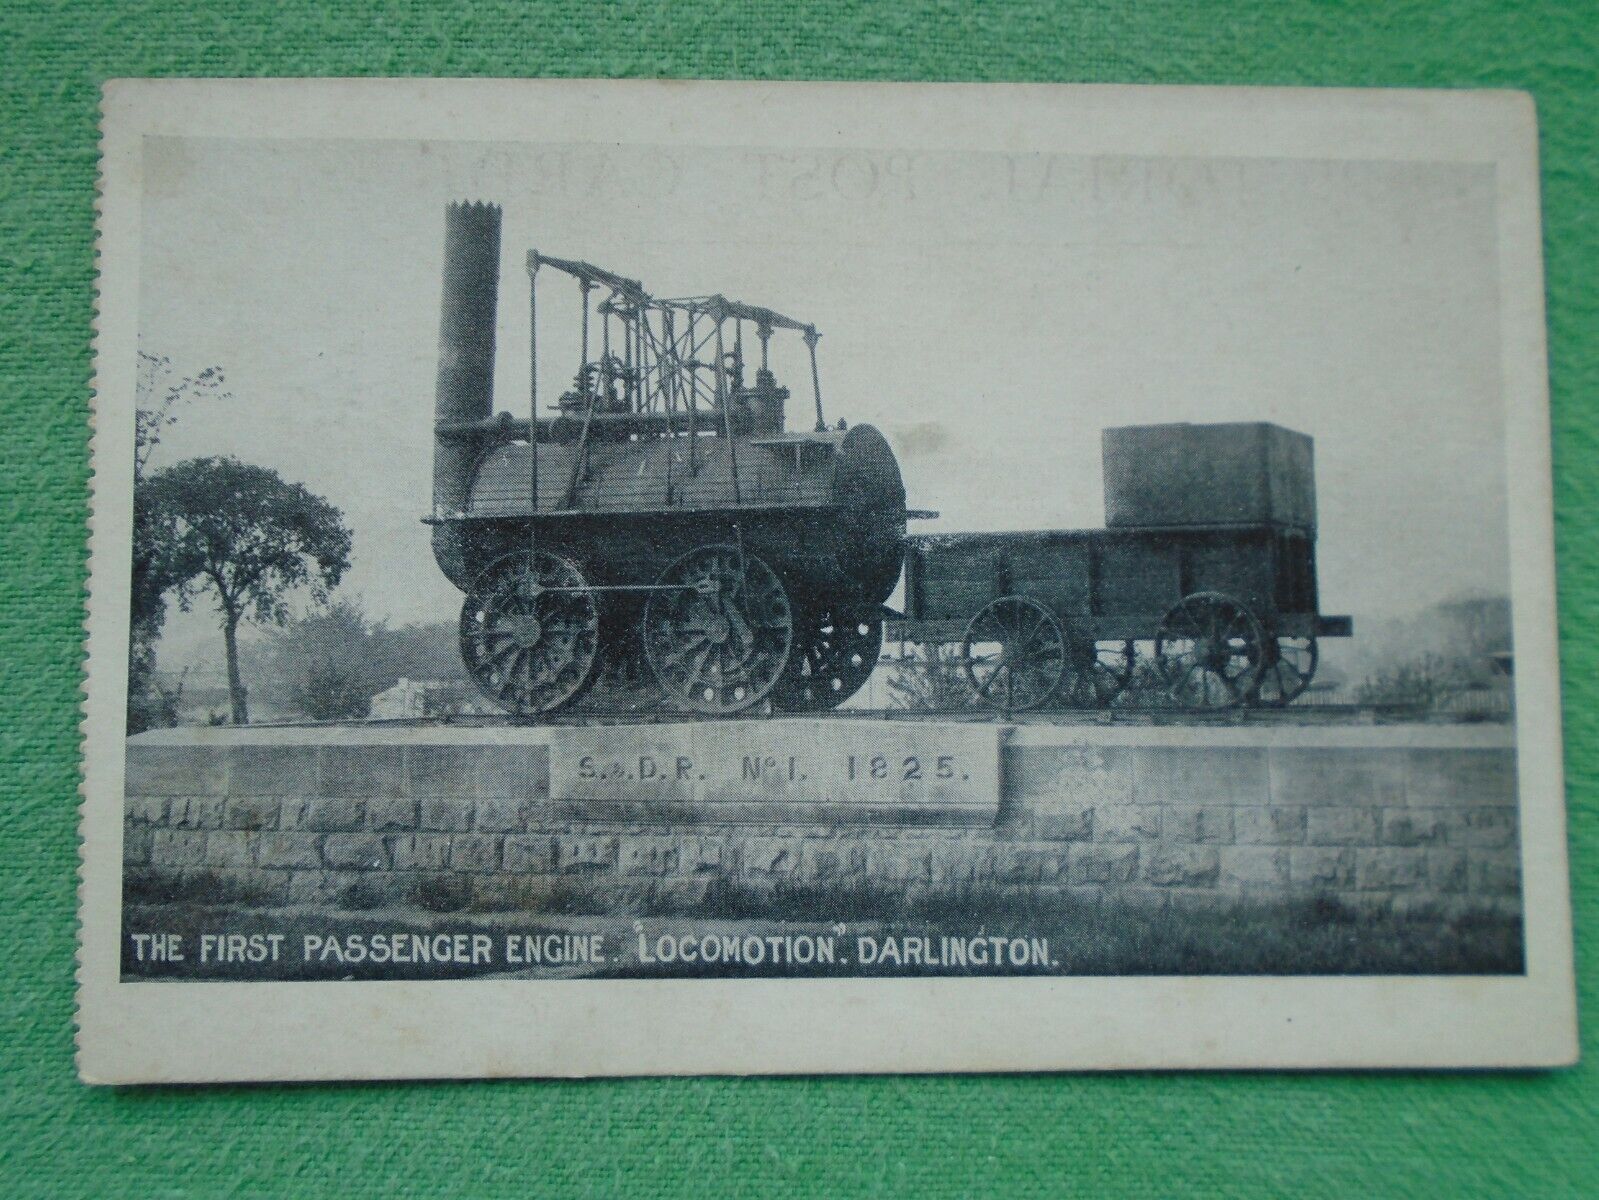 House Clearance - Railway Service of The First Passenger Engine 'Locomotion' Darlington